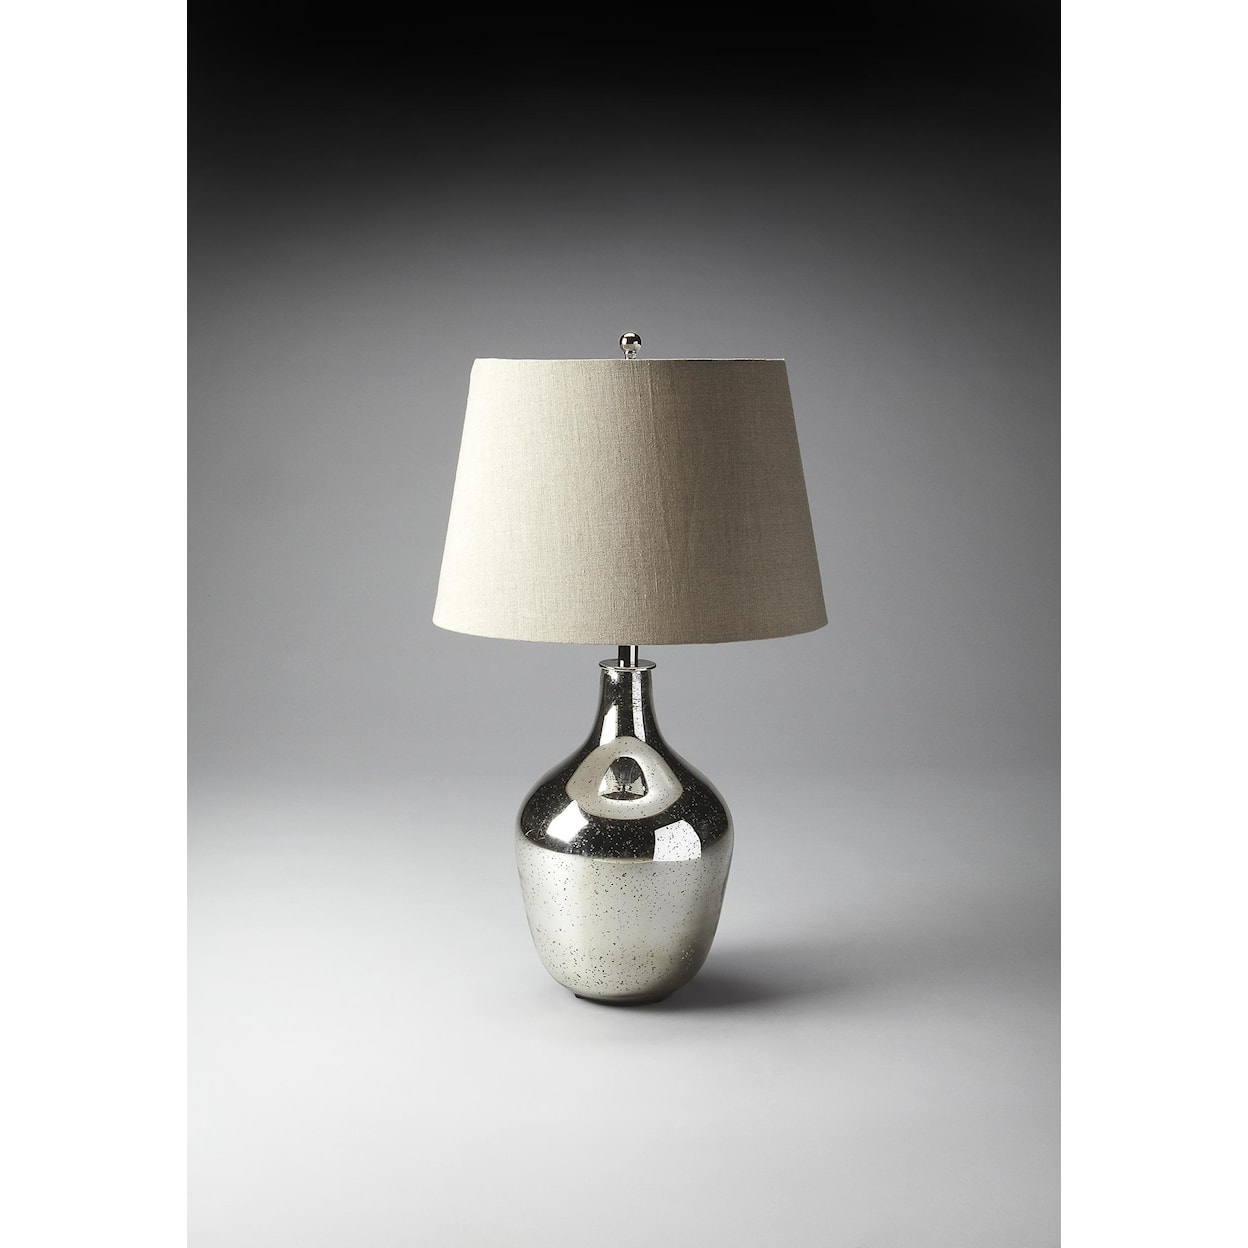 Butler Specialty Company Hors D'oeuvres Table Lamp